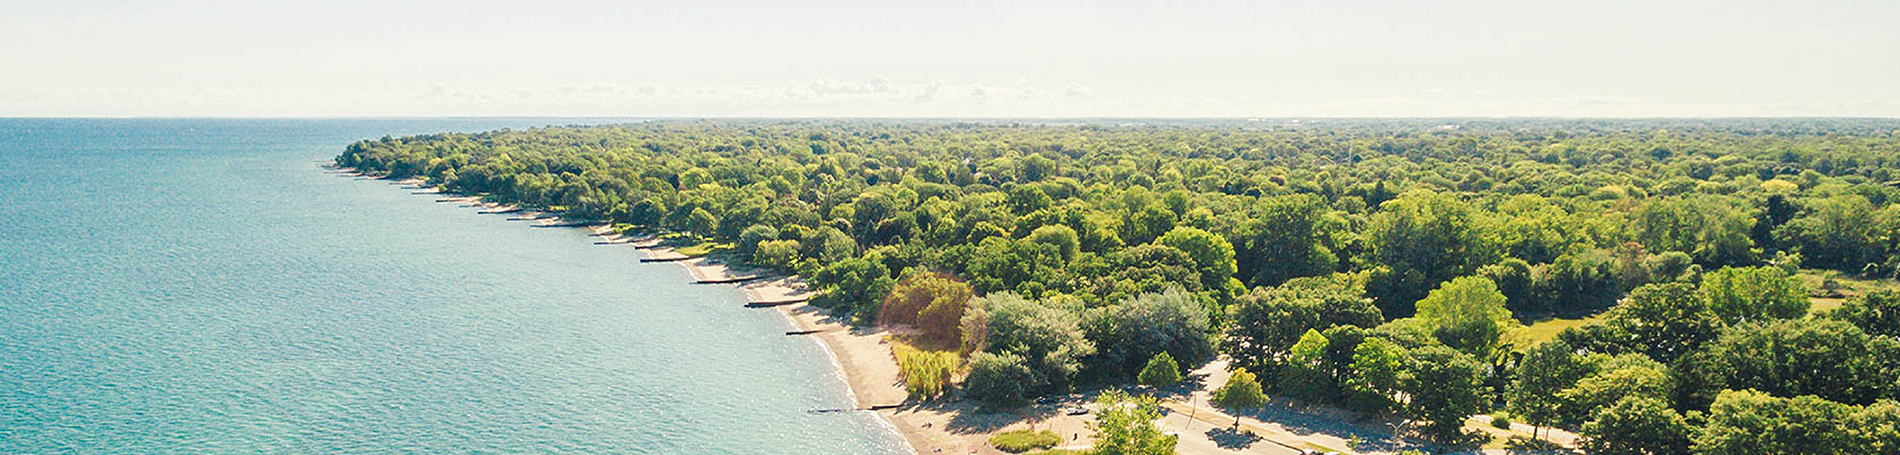 Ariel view of a lake and land with trees.